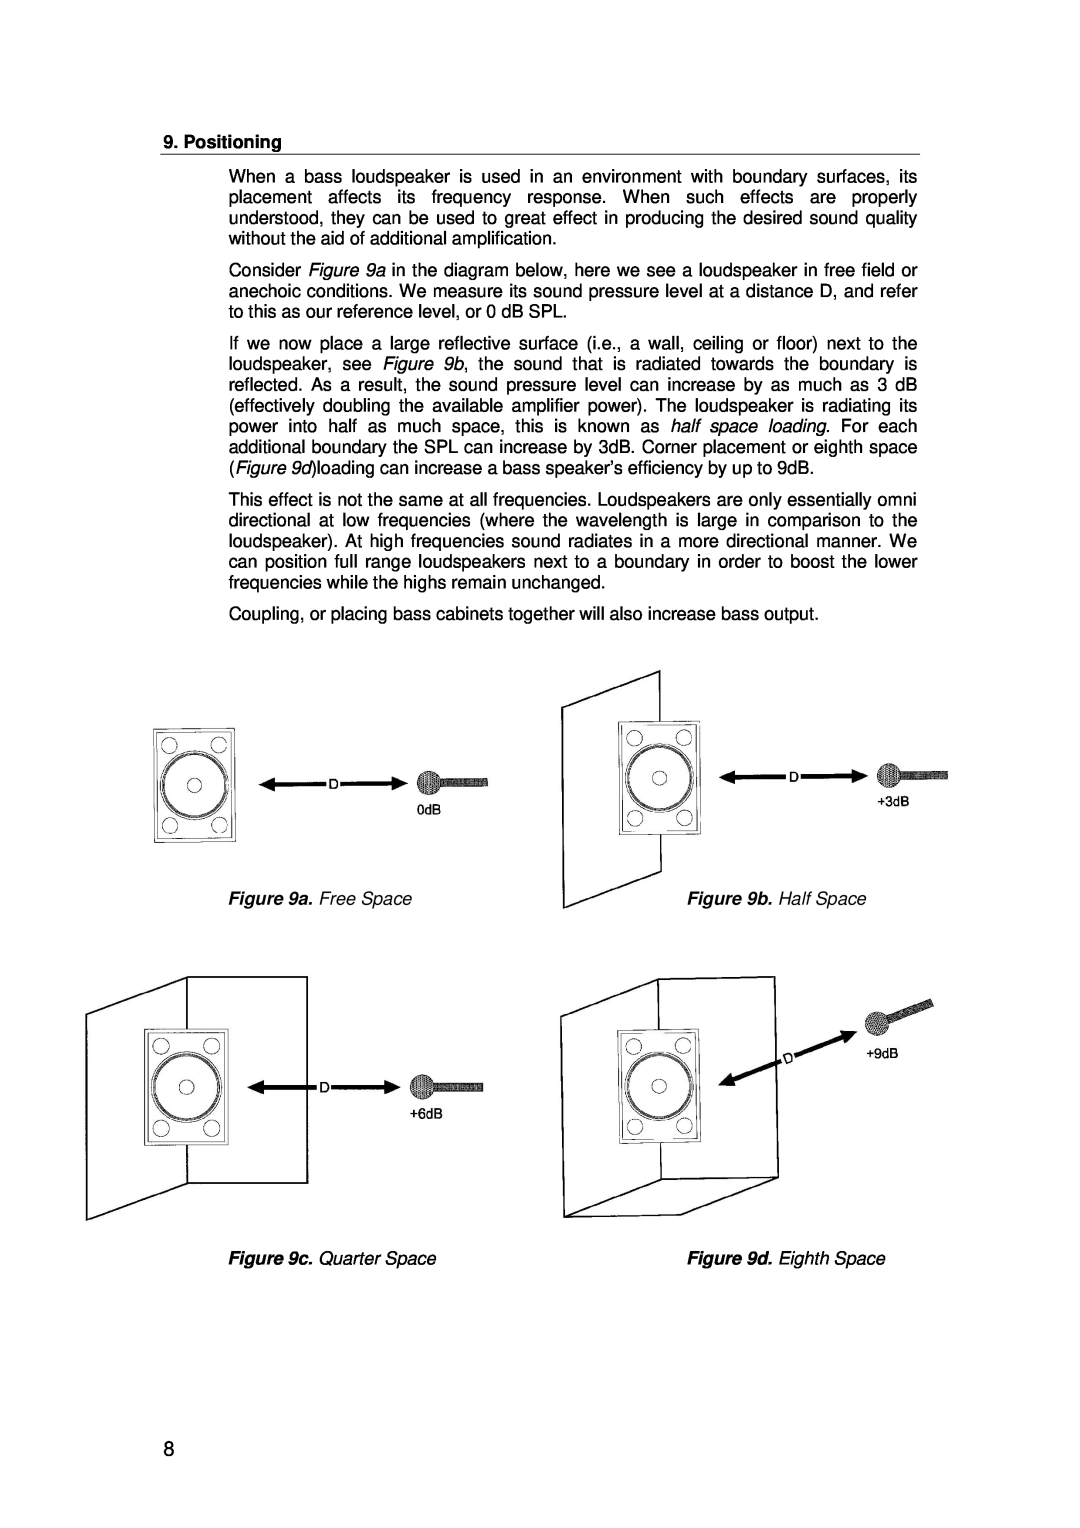 Tannoy B225 user manual Positioning, a. Free Space, b. Half Space, c. Quarter Space, d. Eighth Space 